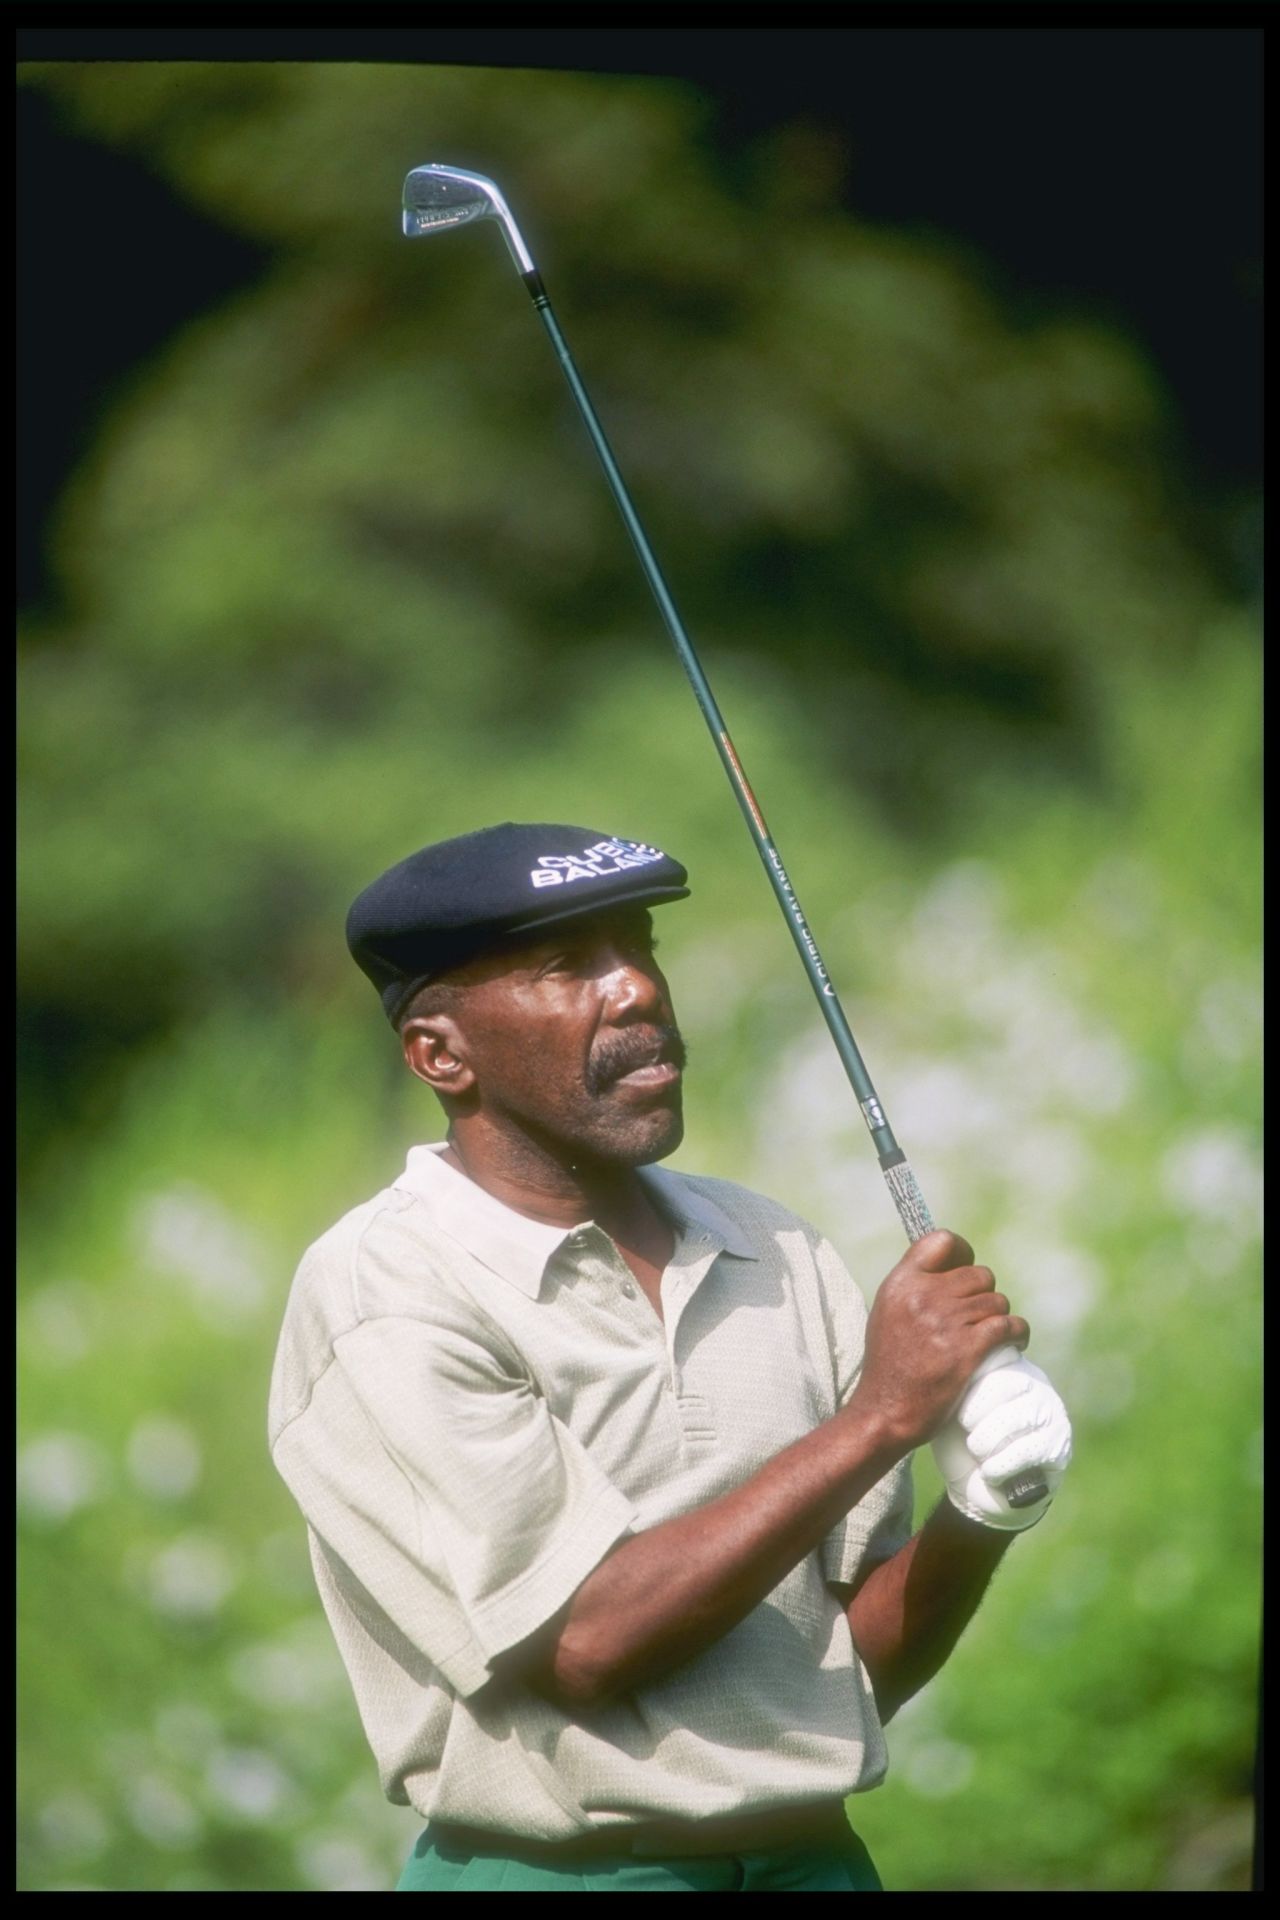 Calvin Peete surpassed Elder's four PGA Tour wins by notching up 12 victories, plus four top-10 finishes in major tournaments. Like Elder, Peete played in the U.S. Ryder Cup team.